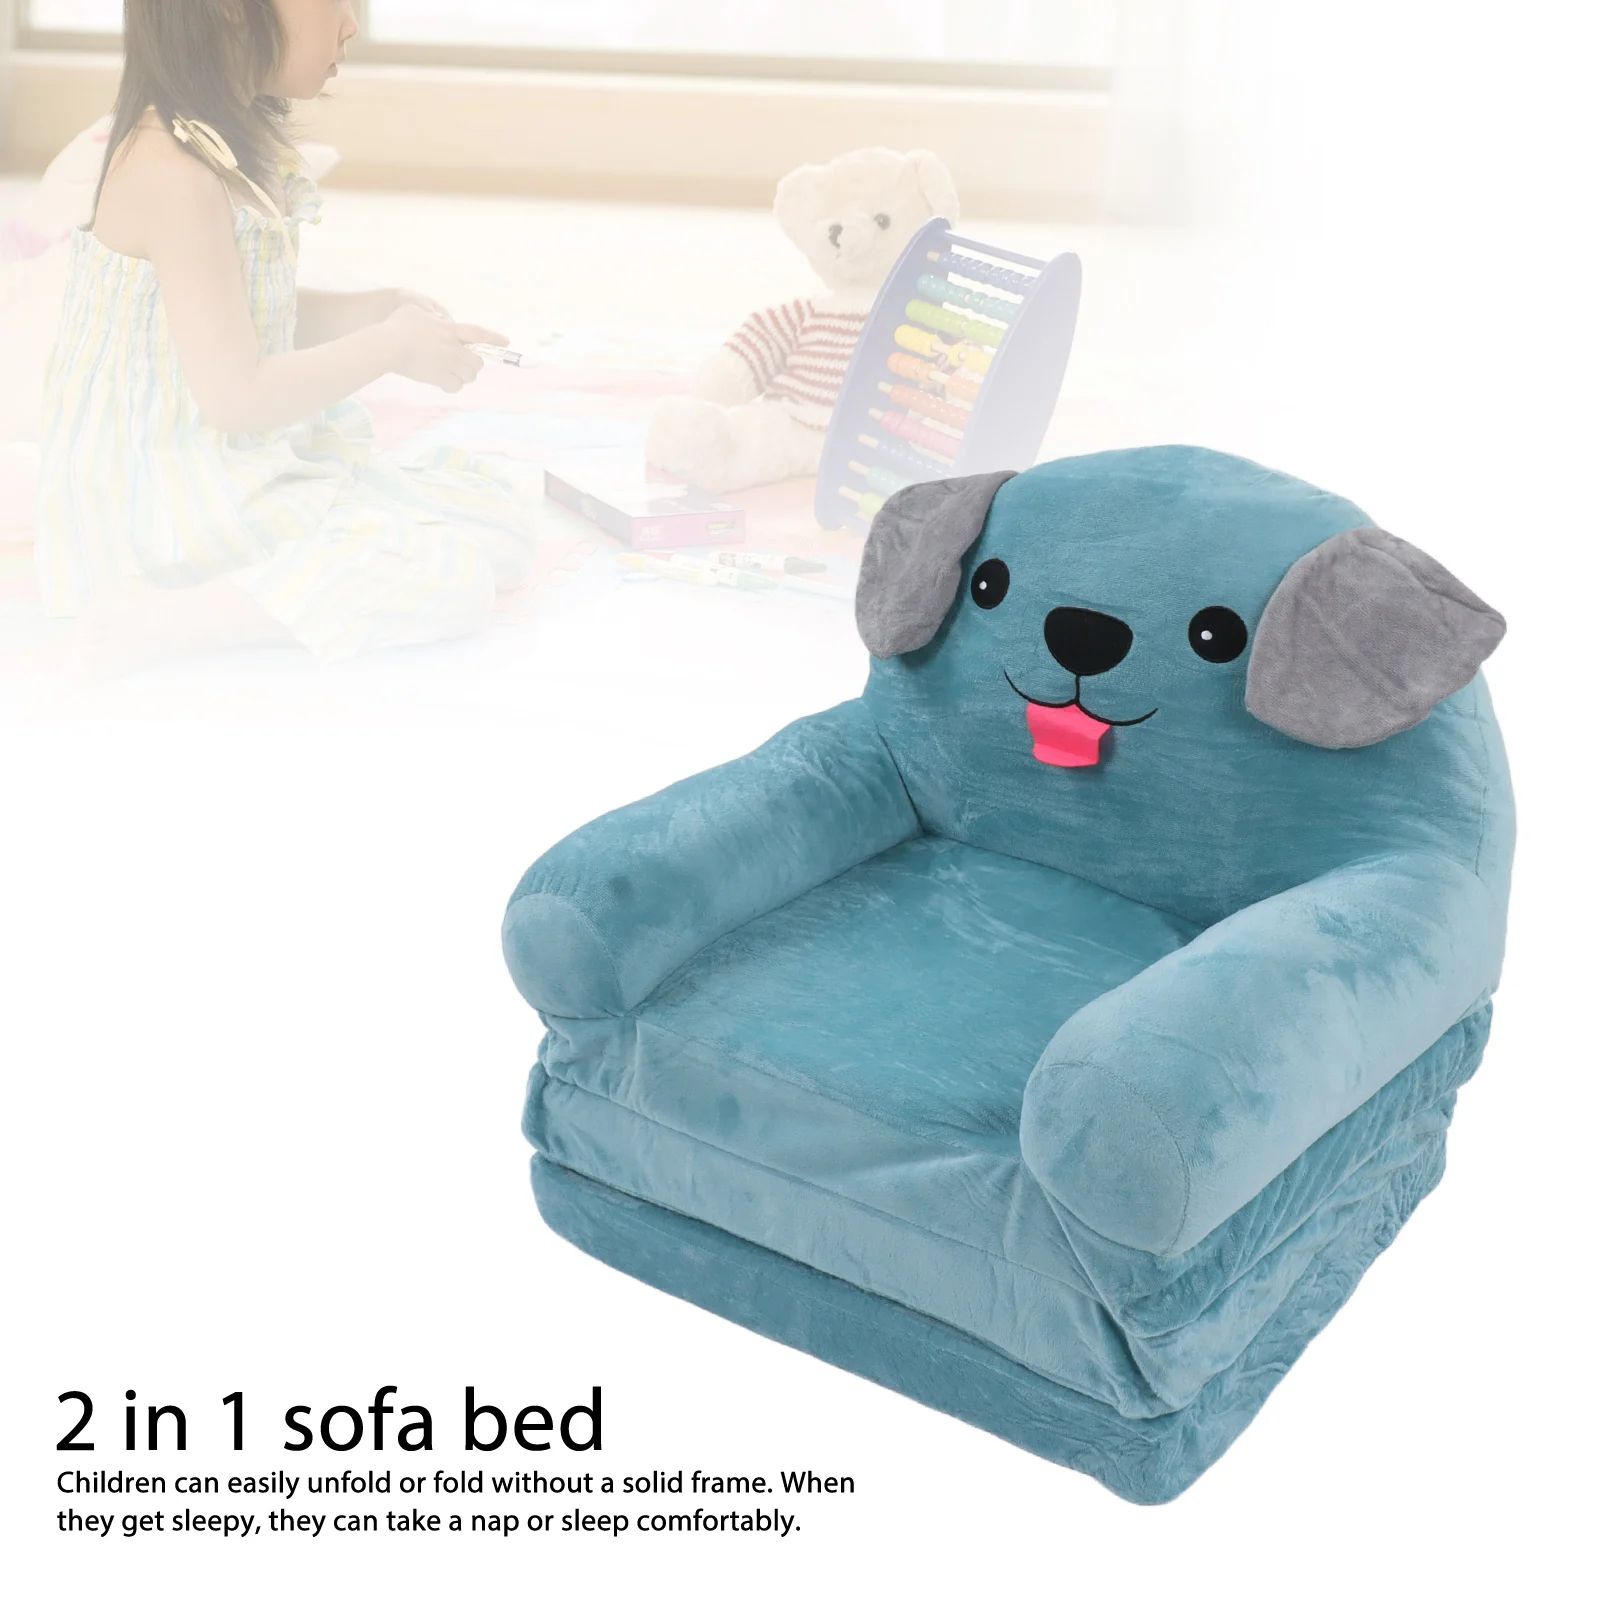 Children Sofa Blue Puppy Children's Sofa Cute Cartoon Folding Small Sofa Bed  Dual Use Child Bean Bag For Kids – Aliexpress Pertaining To 2 In 1 Foldable Children's Sofa Beds (Photo 5 of 15)